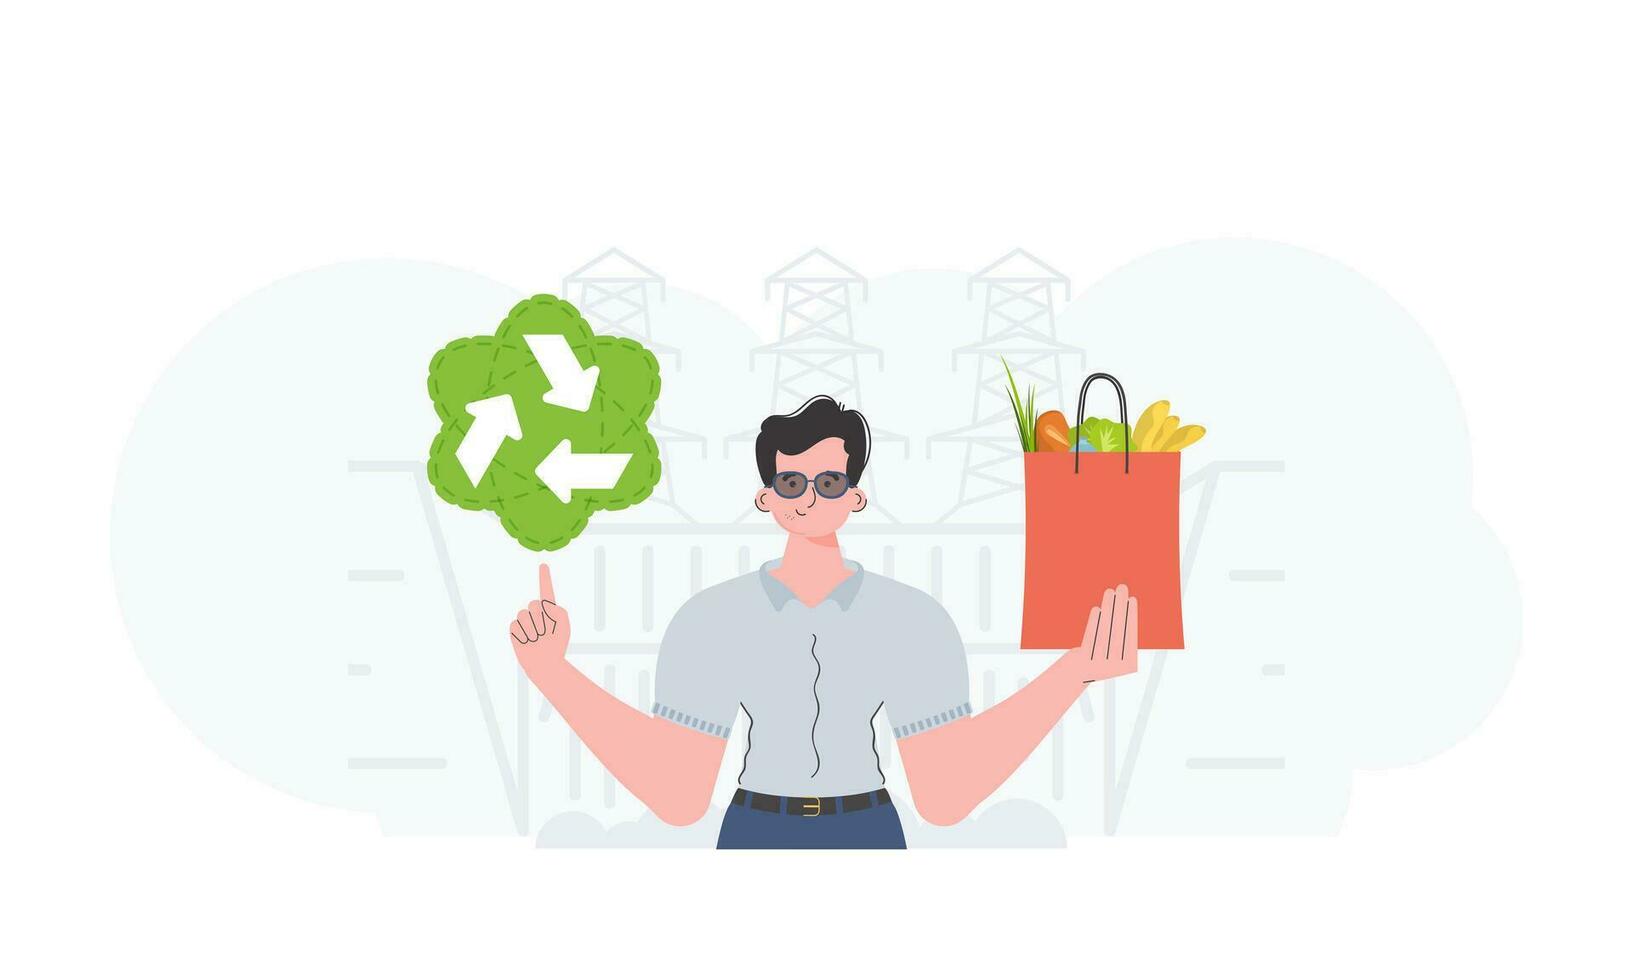 The man is shown waist-deep holding an EKO icon and a bag of proper nutrition. Healthy food, ecology, recycling and zero waste concept. Trend style, vector illustration.